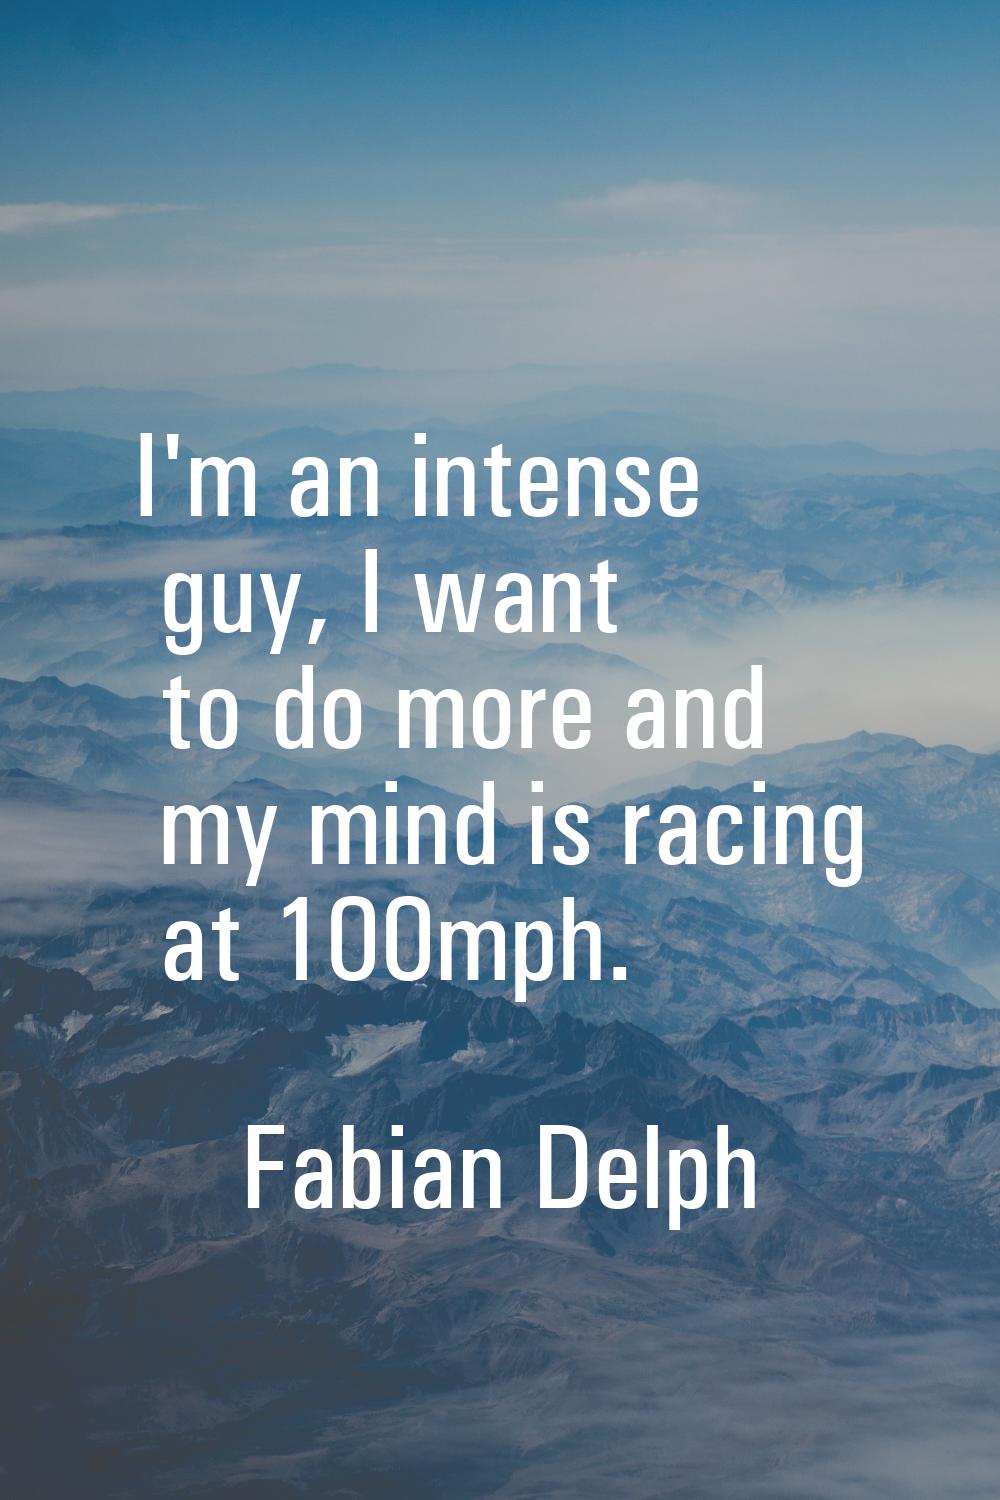 I'm an intense guy, I want to do more and my mind is racing at 100mph.